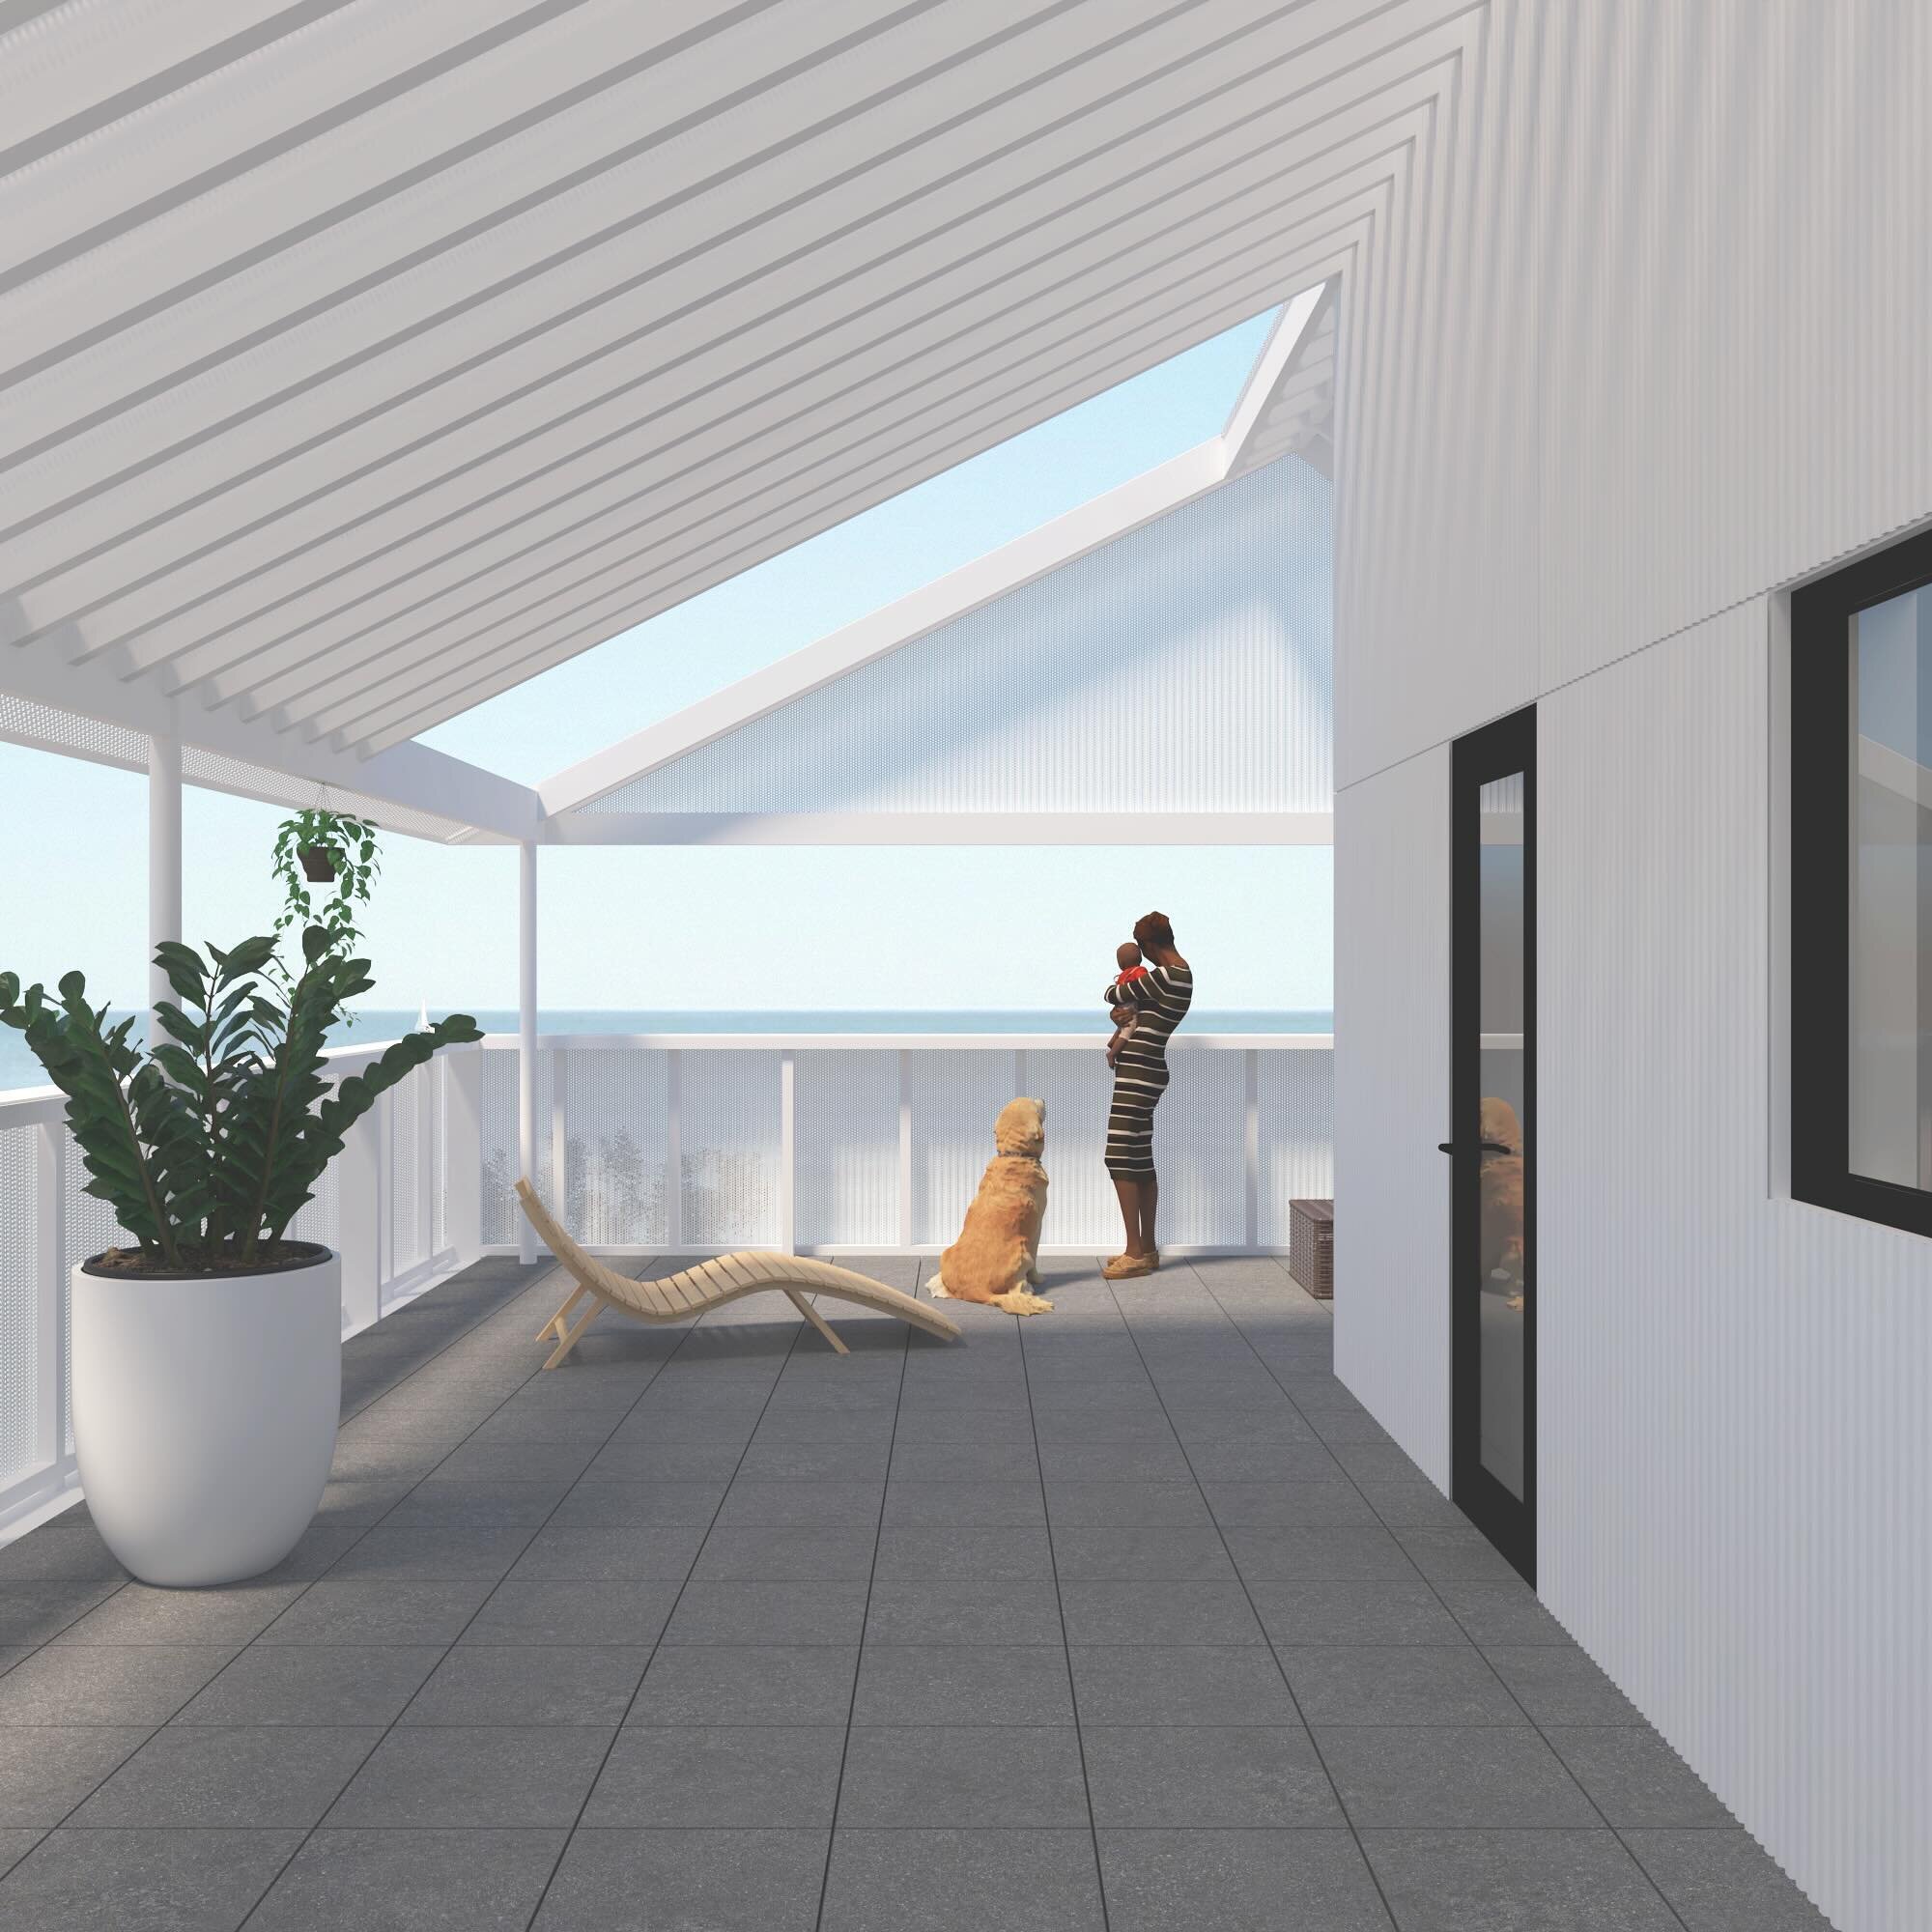 Work in progress with @groupprojectsarchitecture: This new house in the Rockaways, Queens will be topped by a perforated steel balcony with views of the Atlantic Ocean.

#BlueTruckStudio #ResidentialDesign #SanFranciscoArchitect #CaliforniaArchitect 